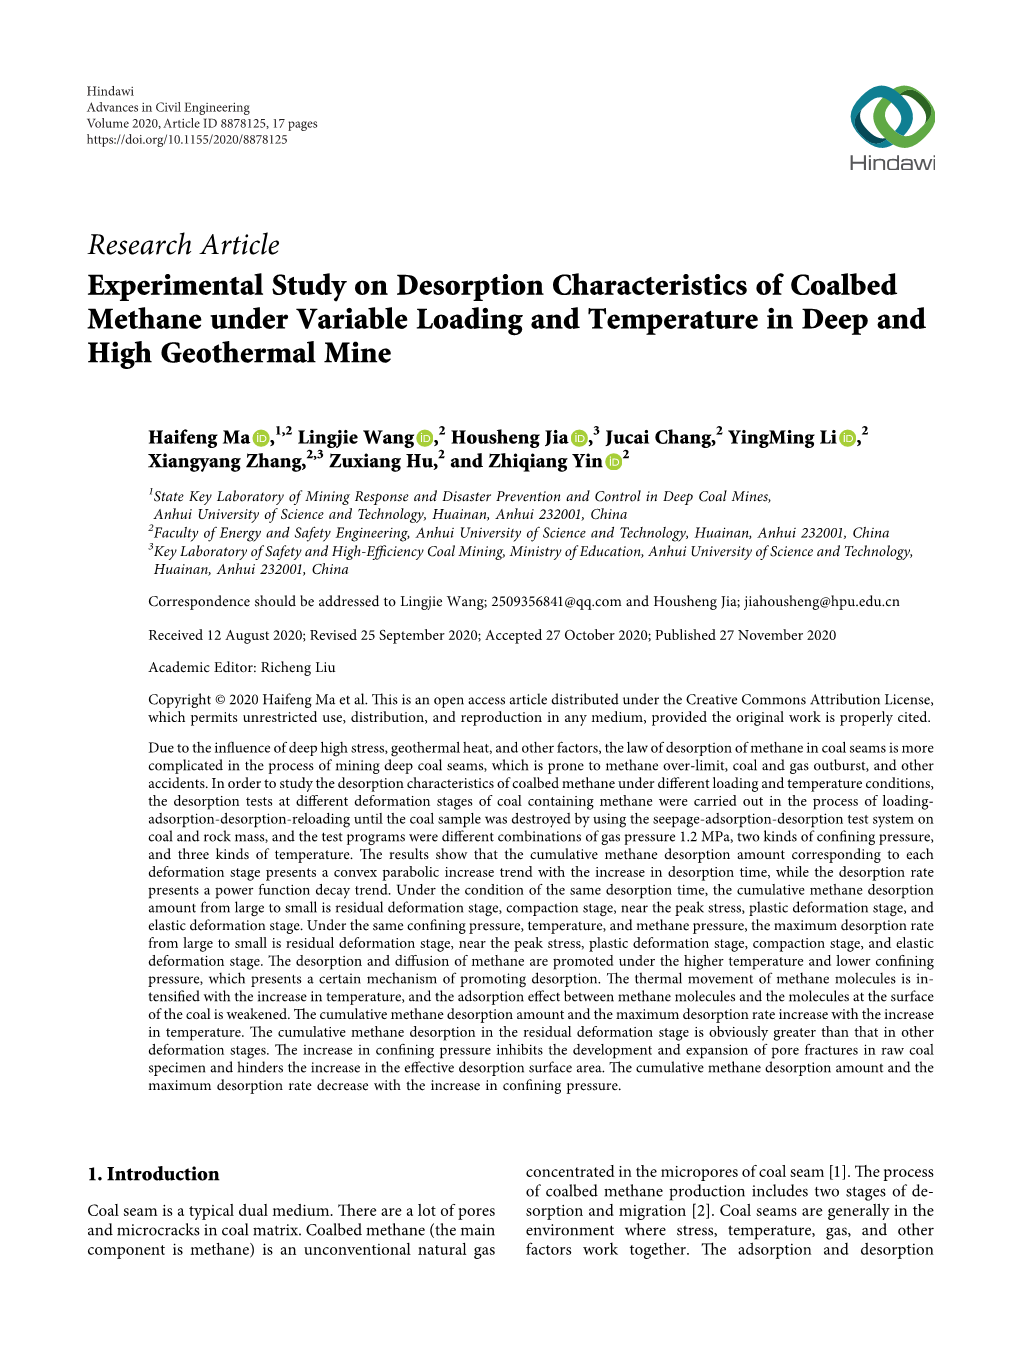 Research Article Experimental Study on Desorption Characteristics of Coalbed Methane Under Variable Loading and Temperature in Deep and High Geothermal Mine